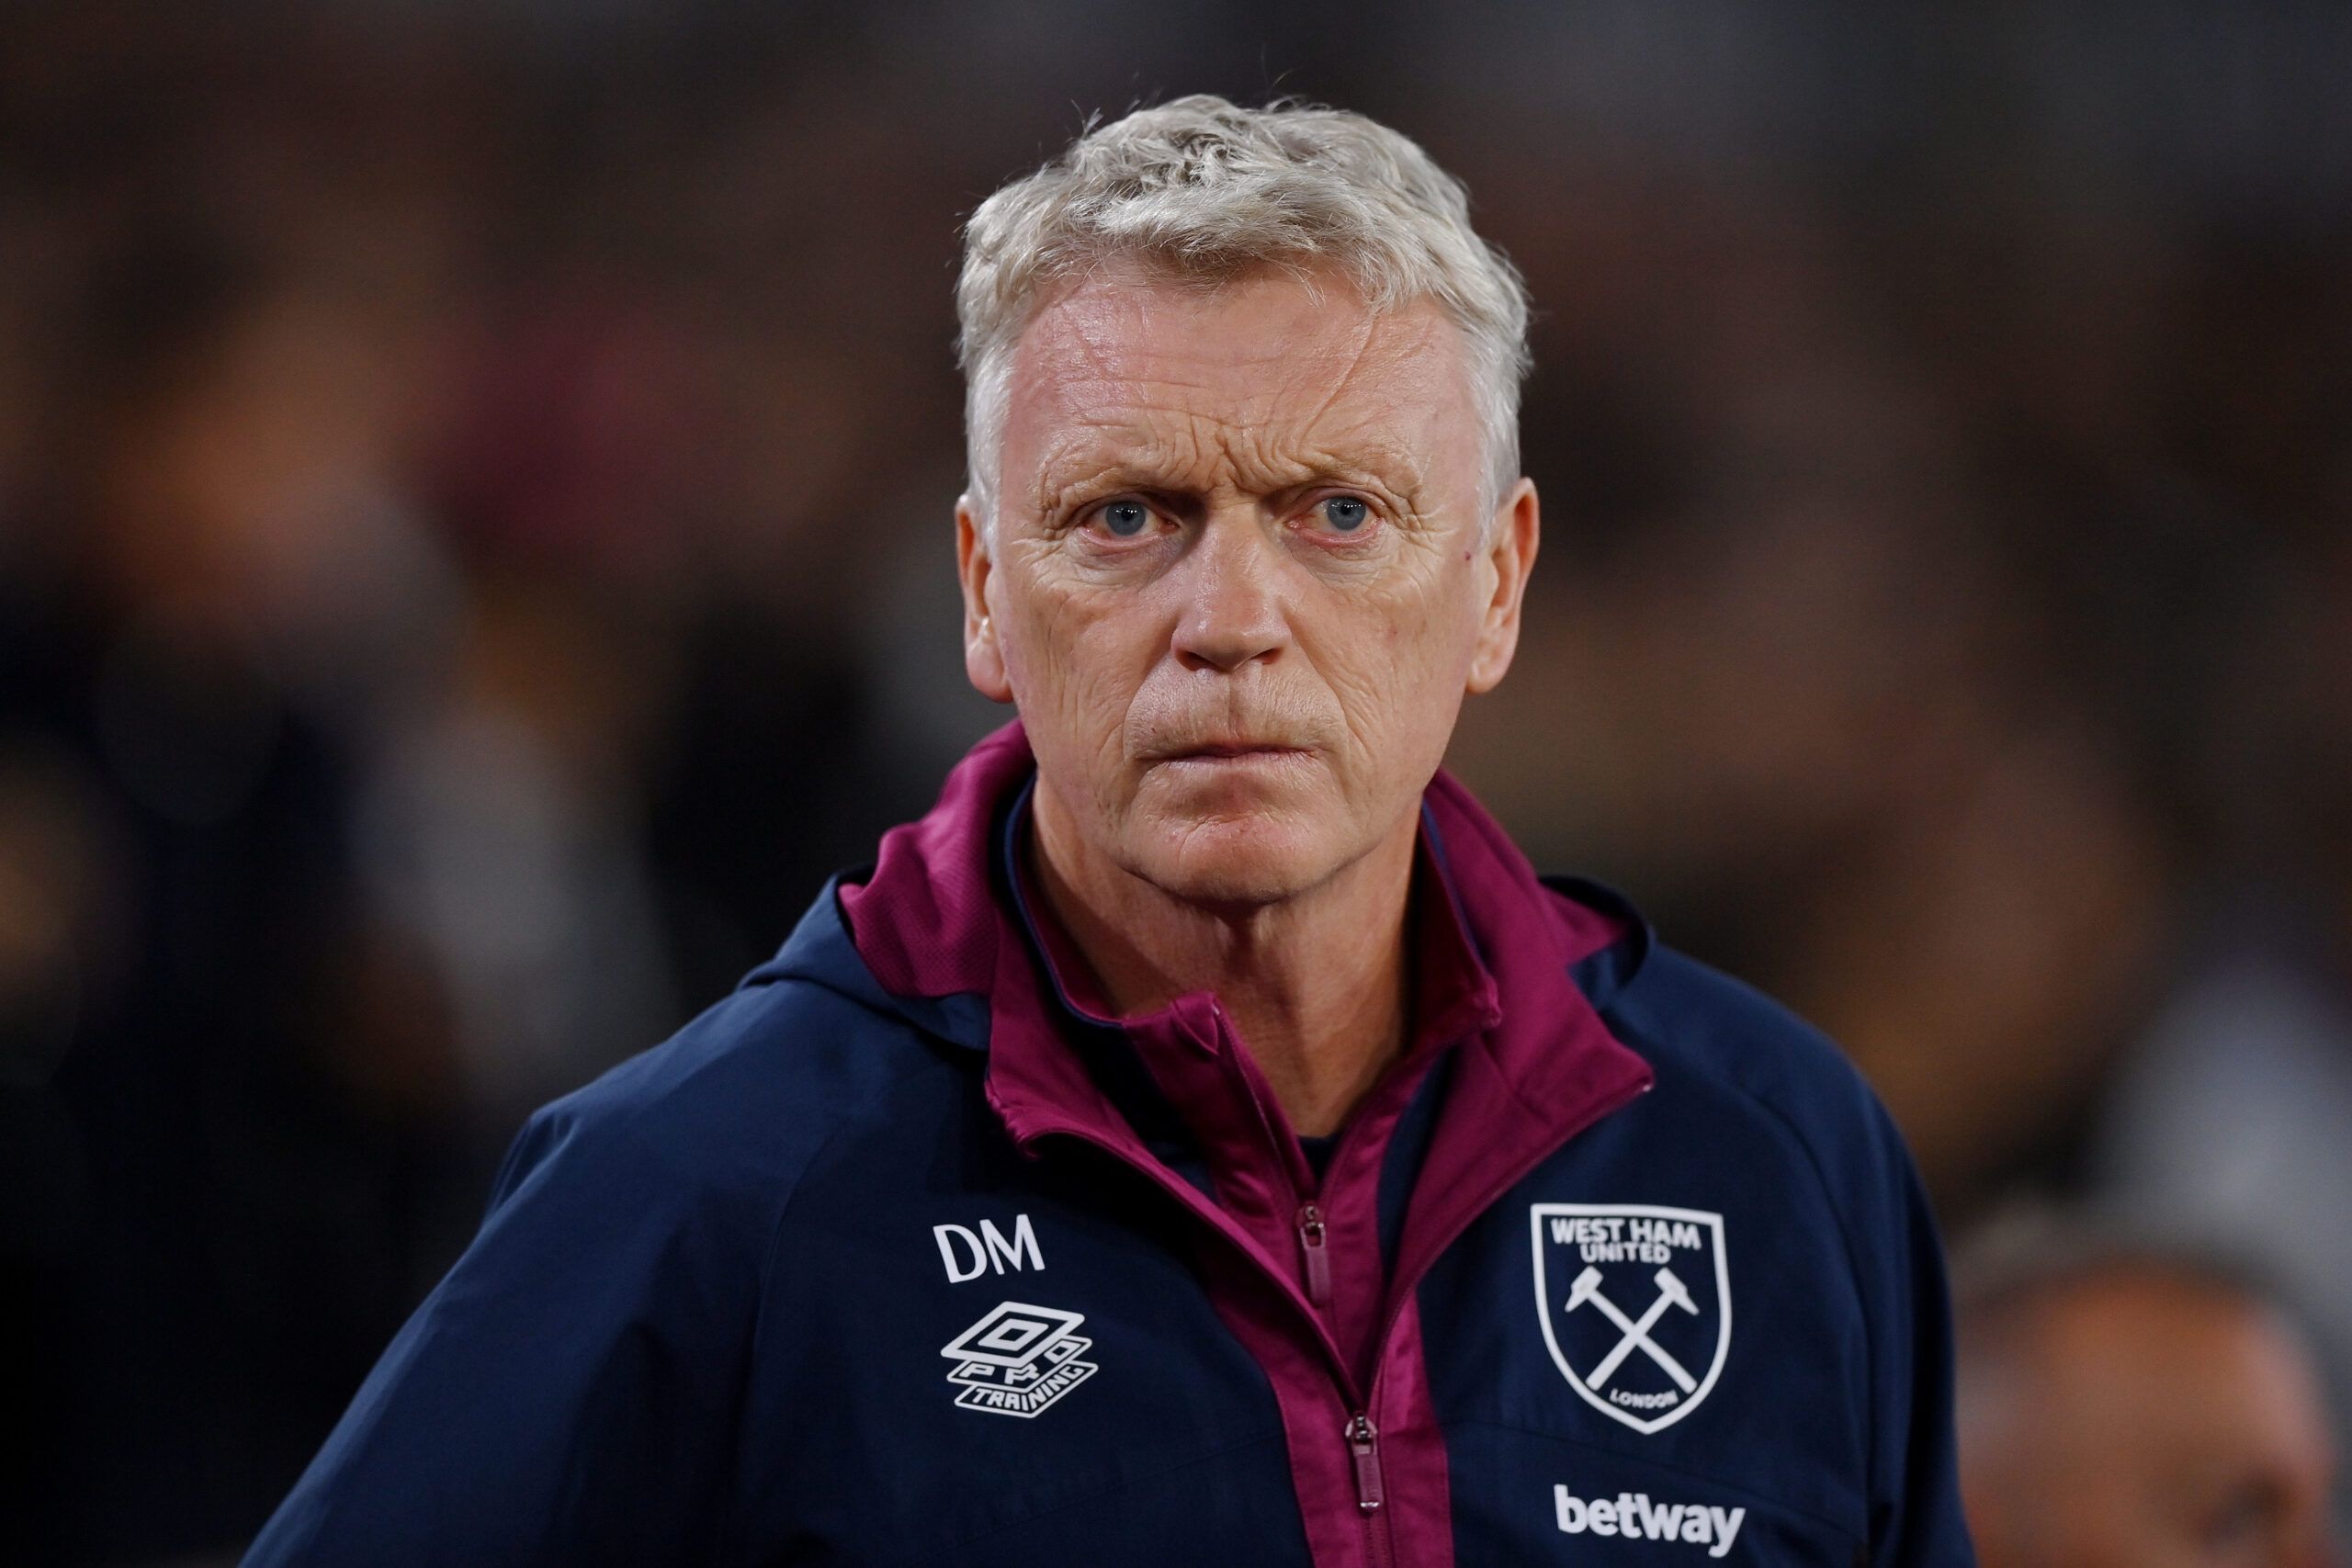 David Moyes looking stone-faced at West Ham